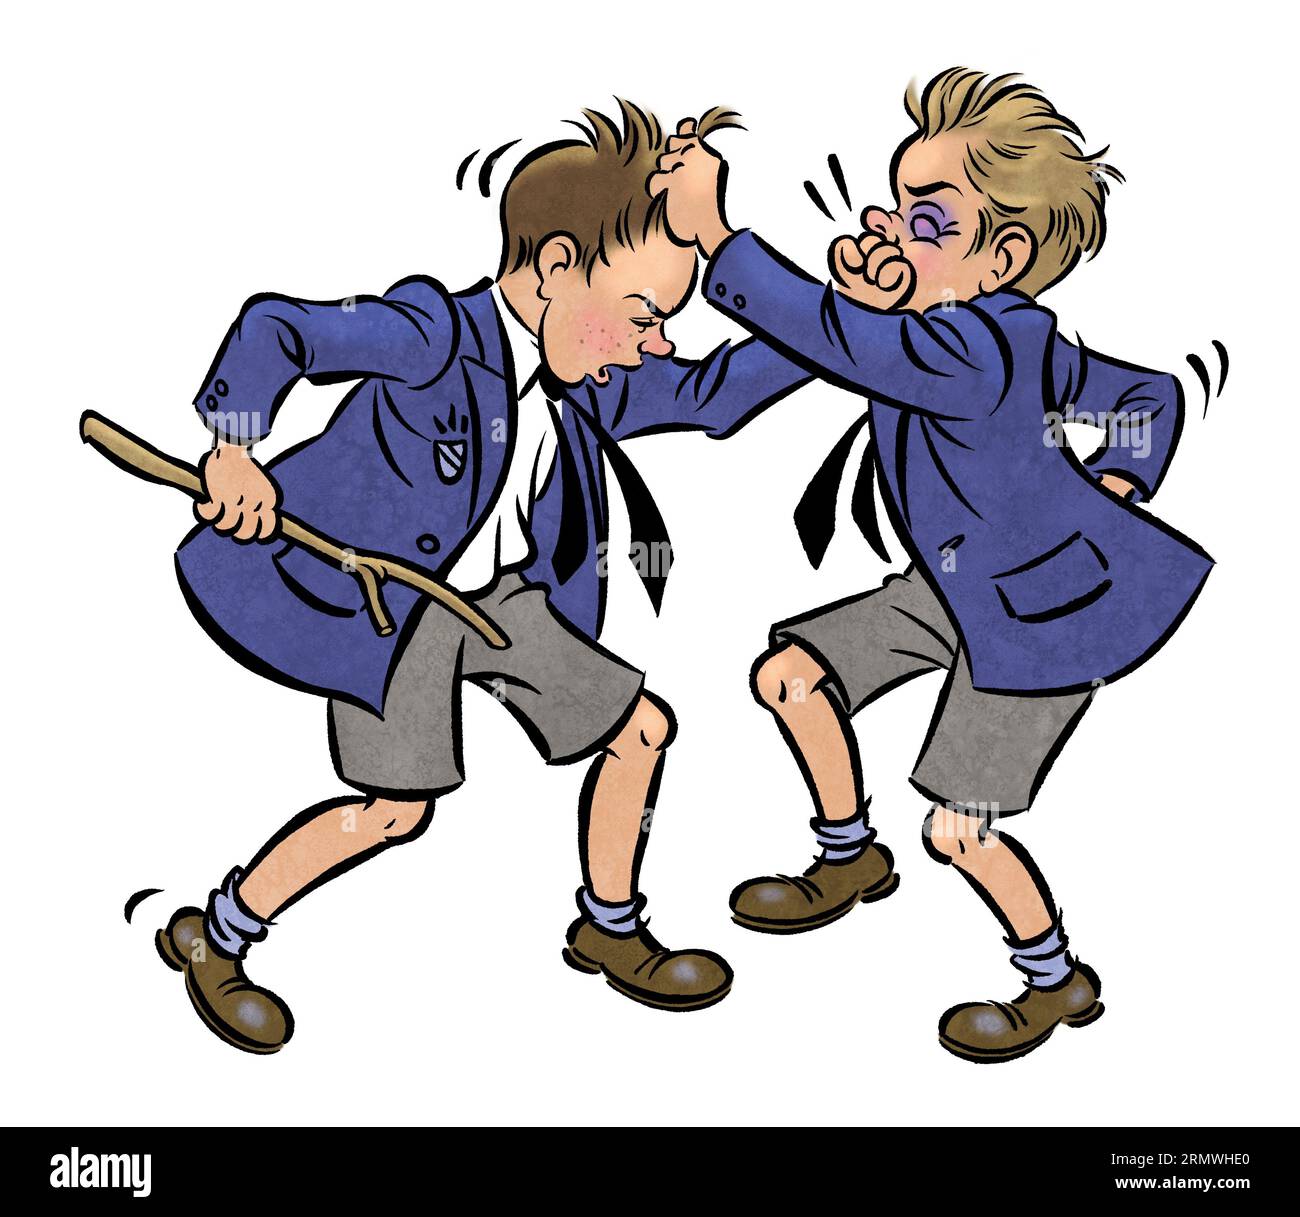 Illustration of Two Fighting Schoolboys Stock Photo